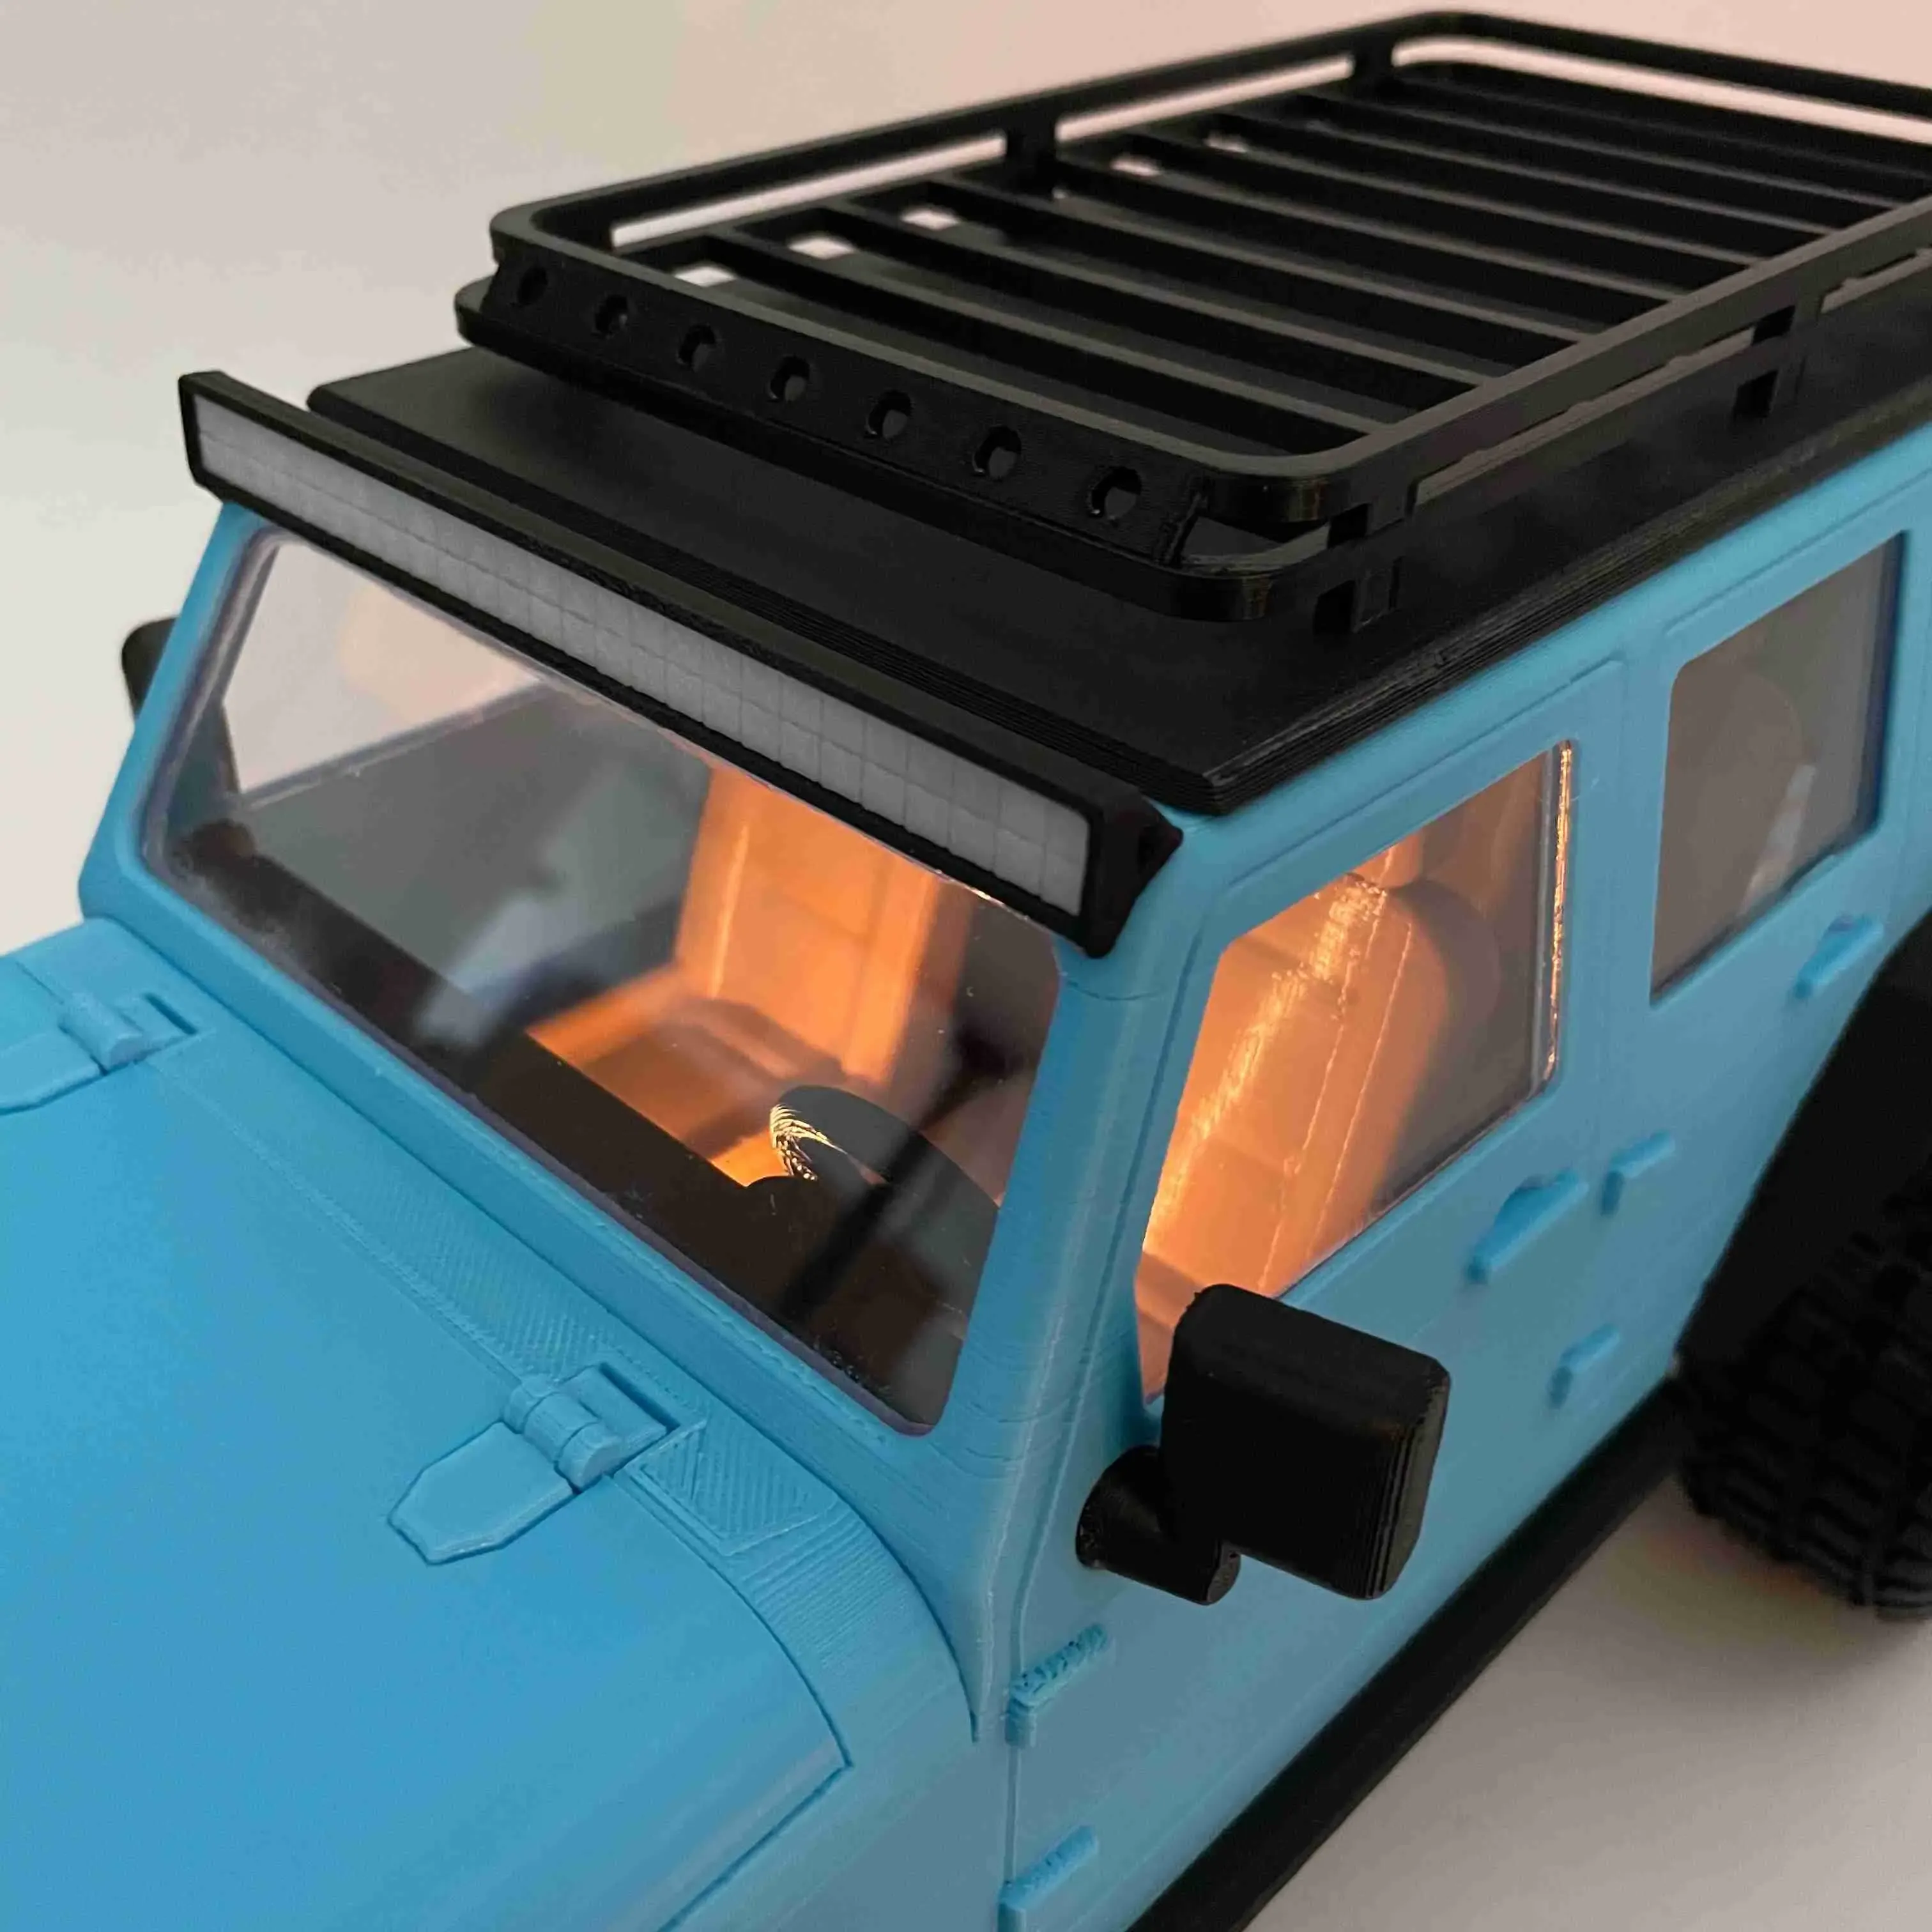 JEEP WRANGLER with removable Hardtop - Scale 1:12